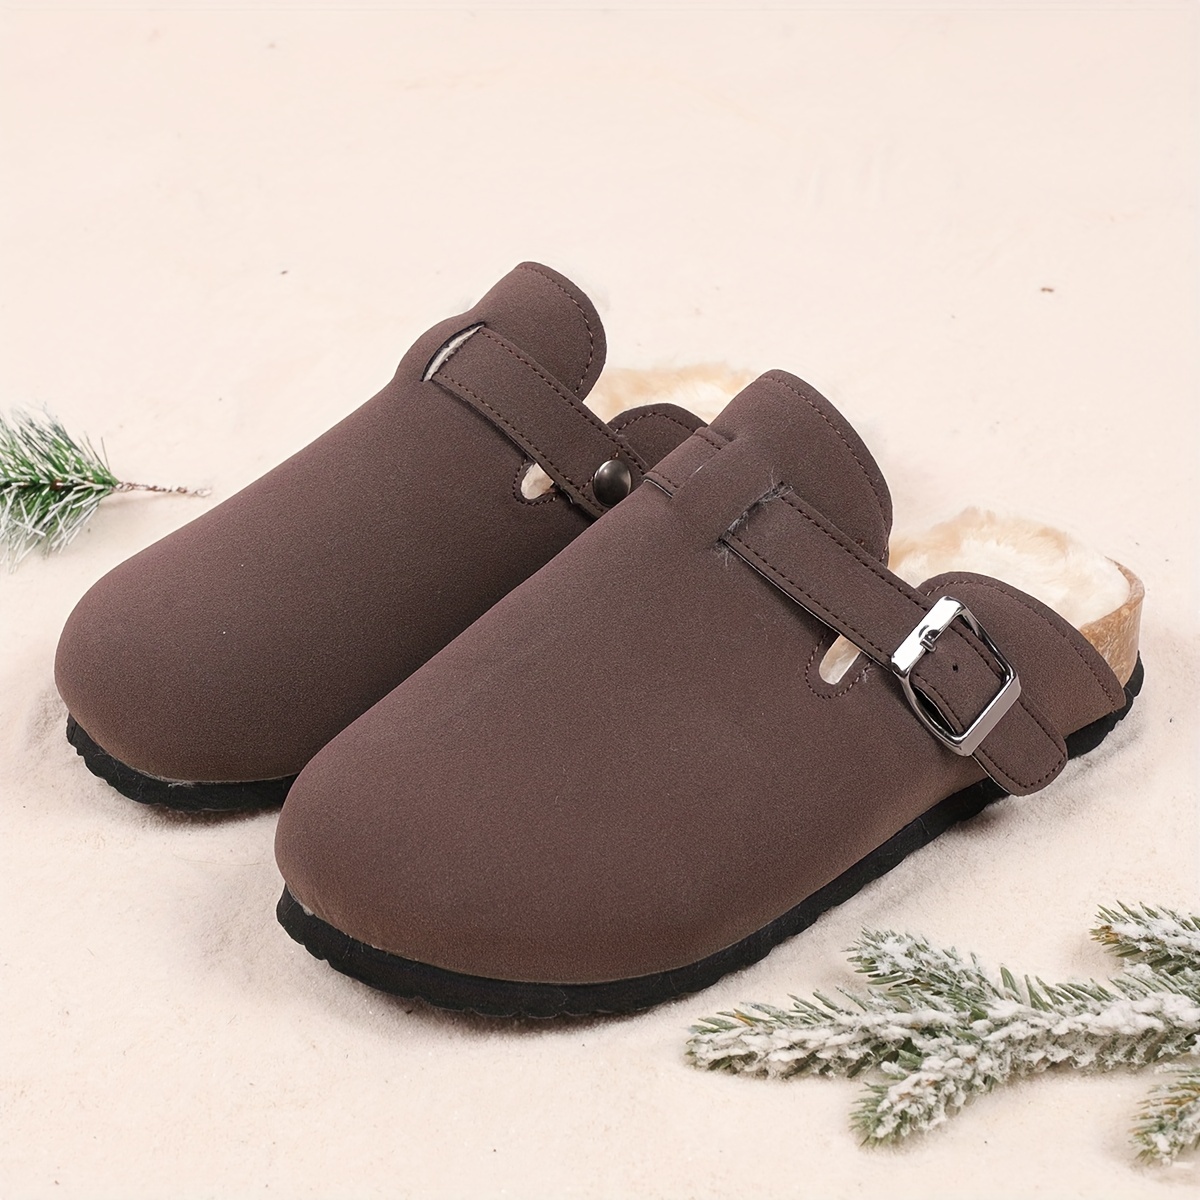 womens buckle strap detailed mules casual slip on plush lined shoes comfortable flat winter shoes details 4